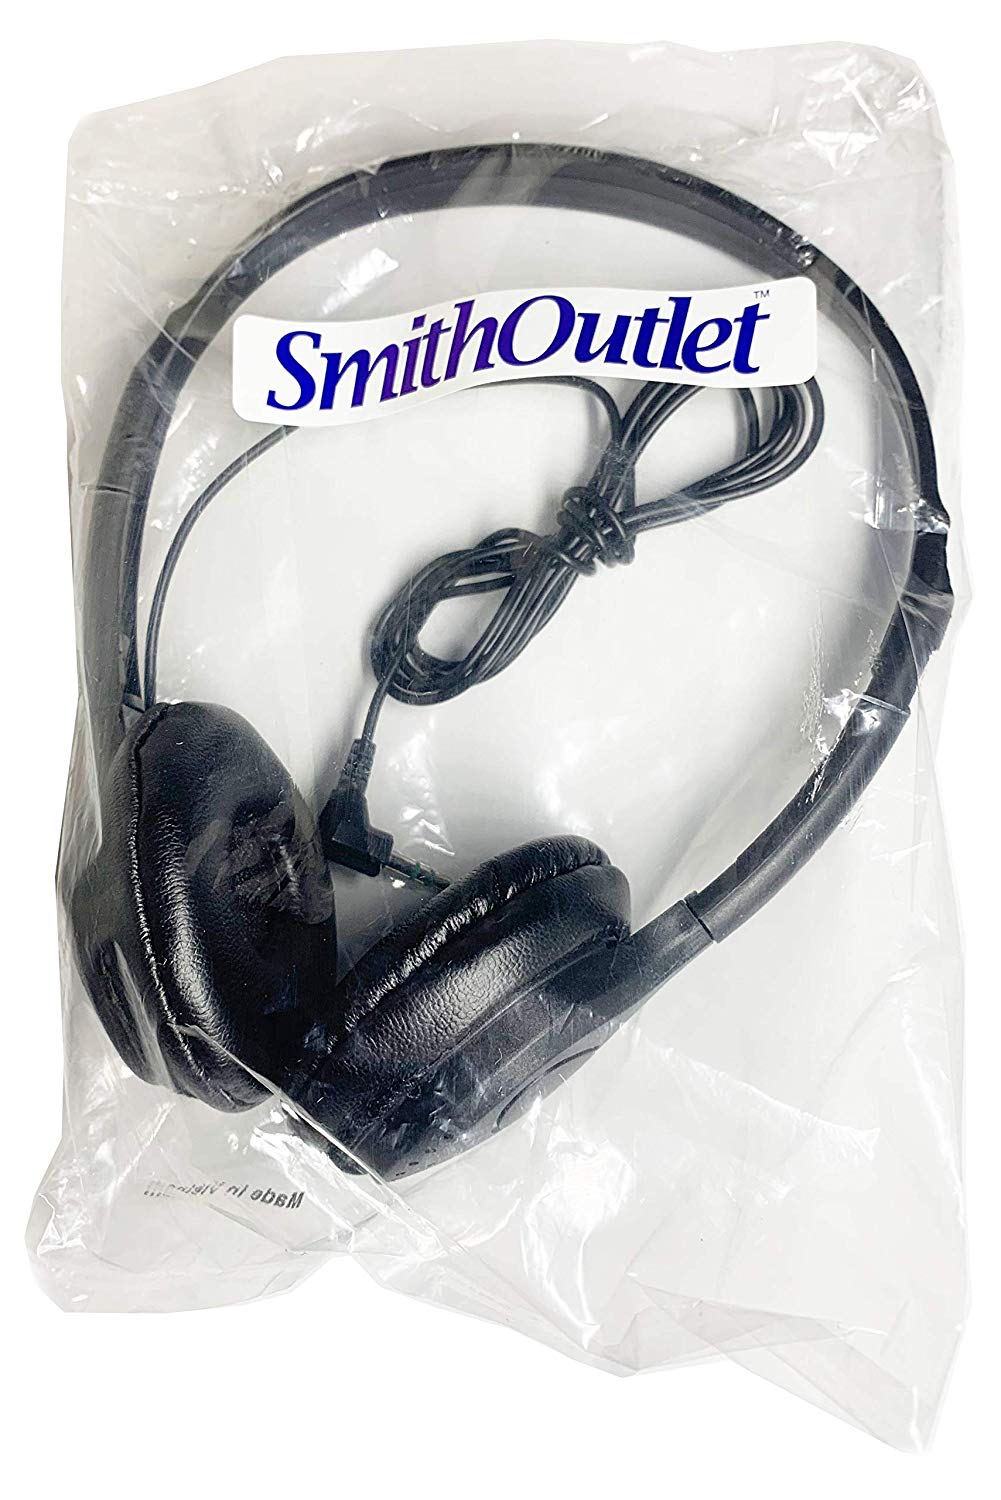 SmithOutlet 25 Pack Over The Head Low Cost Headphones in Bulk (Part#: SG-313-25)